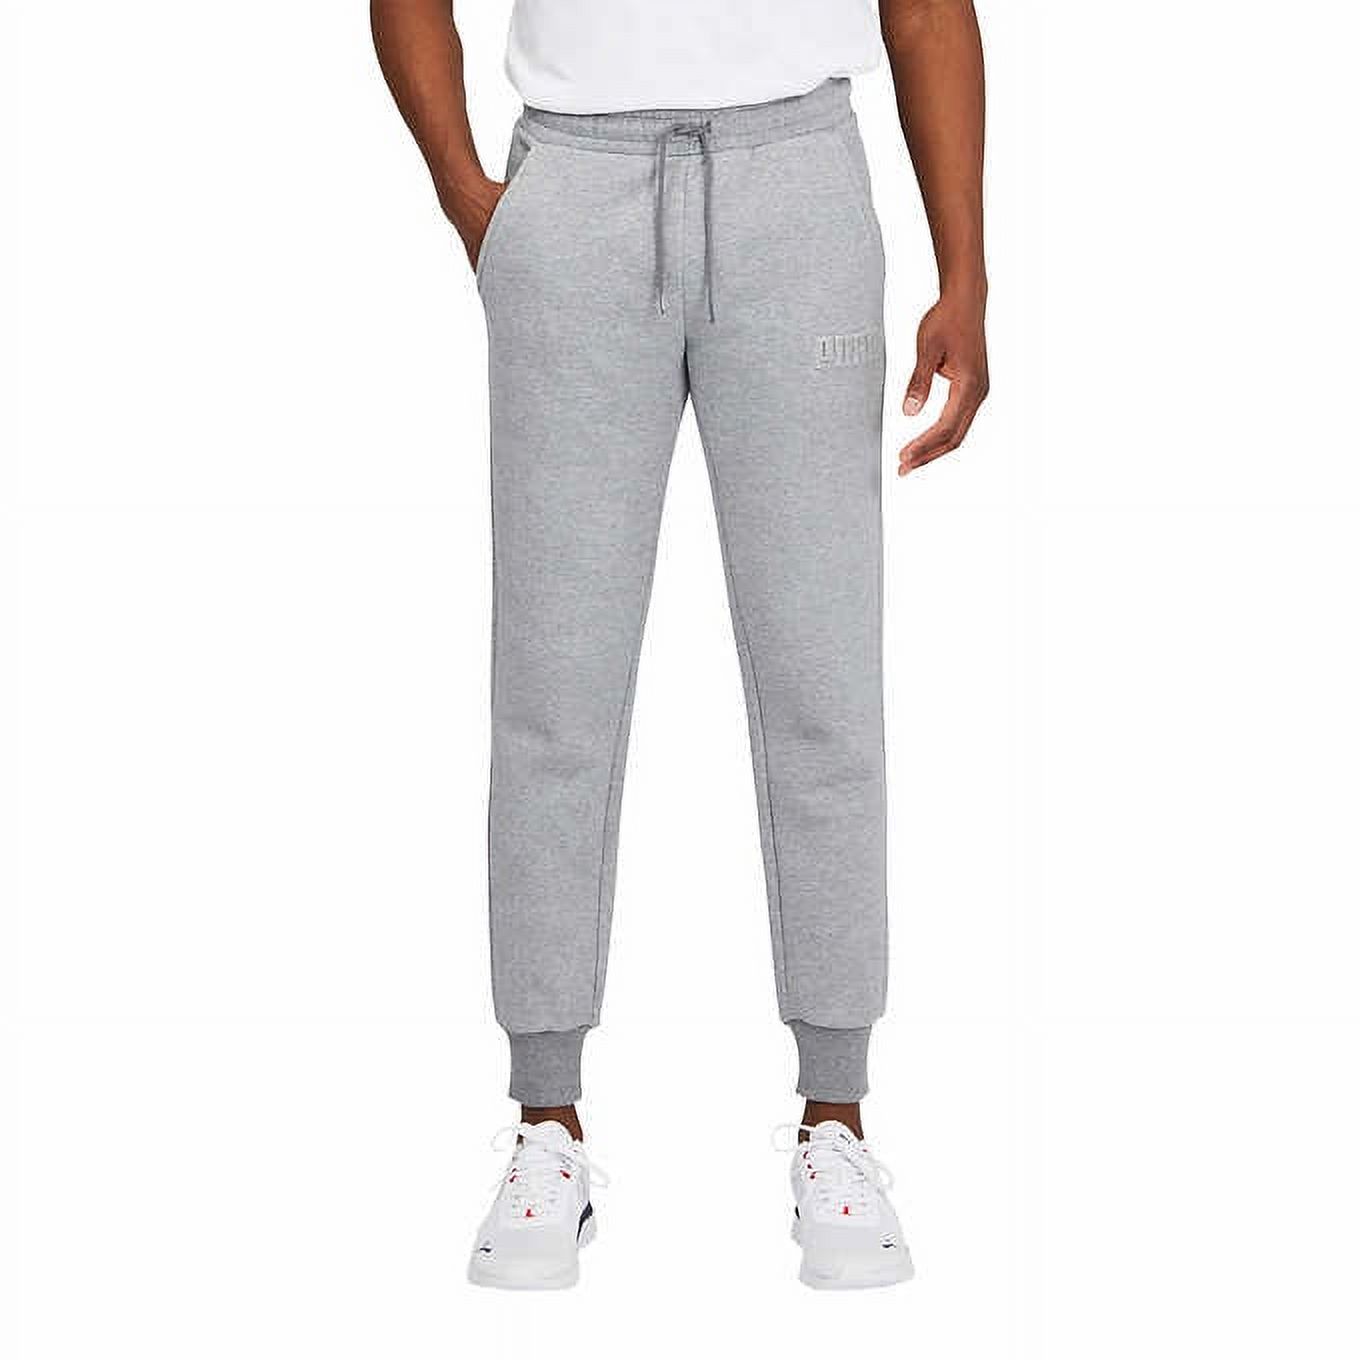 Puma Men's Fleece Lined Tapered Leg Cuffed Athletic Sweatpants (Gray, X-Large) - image 1 of 4